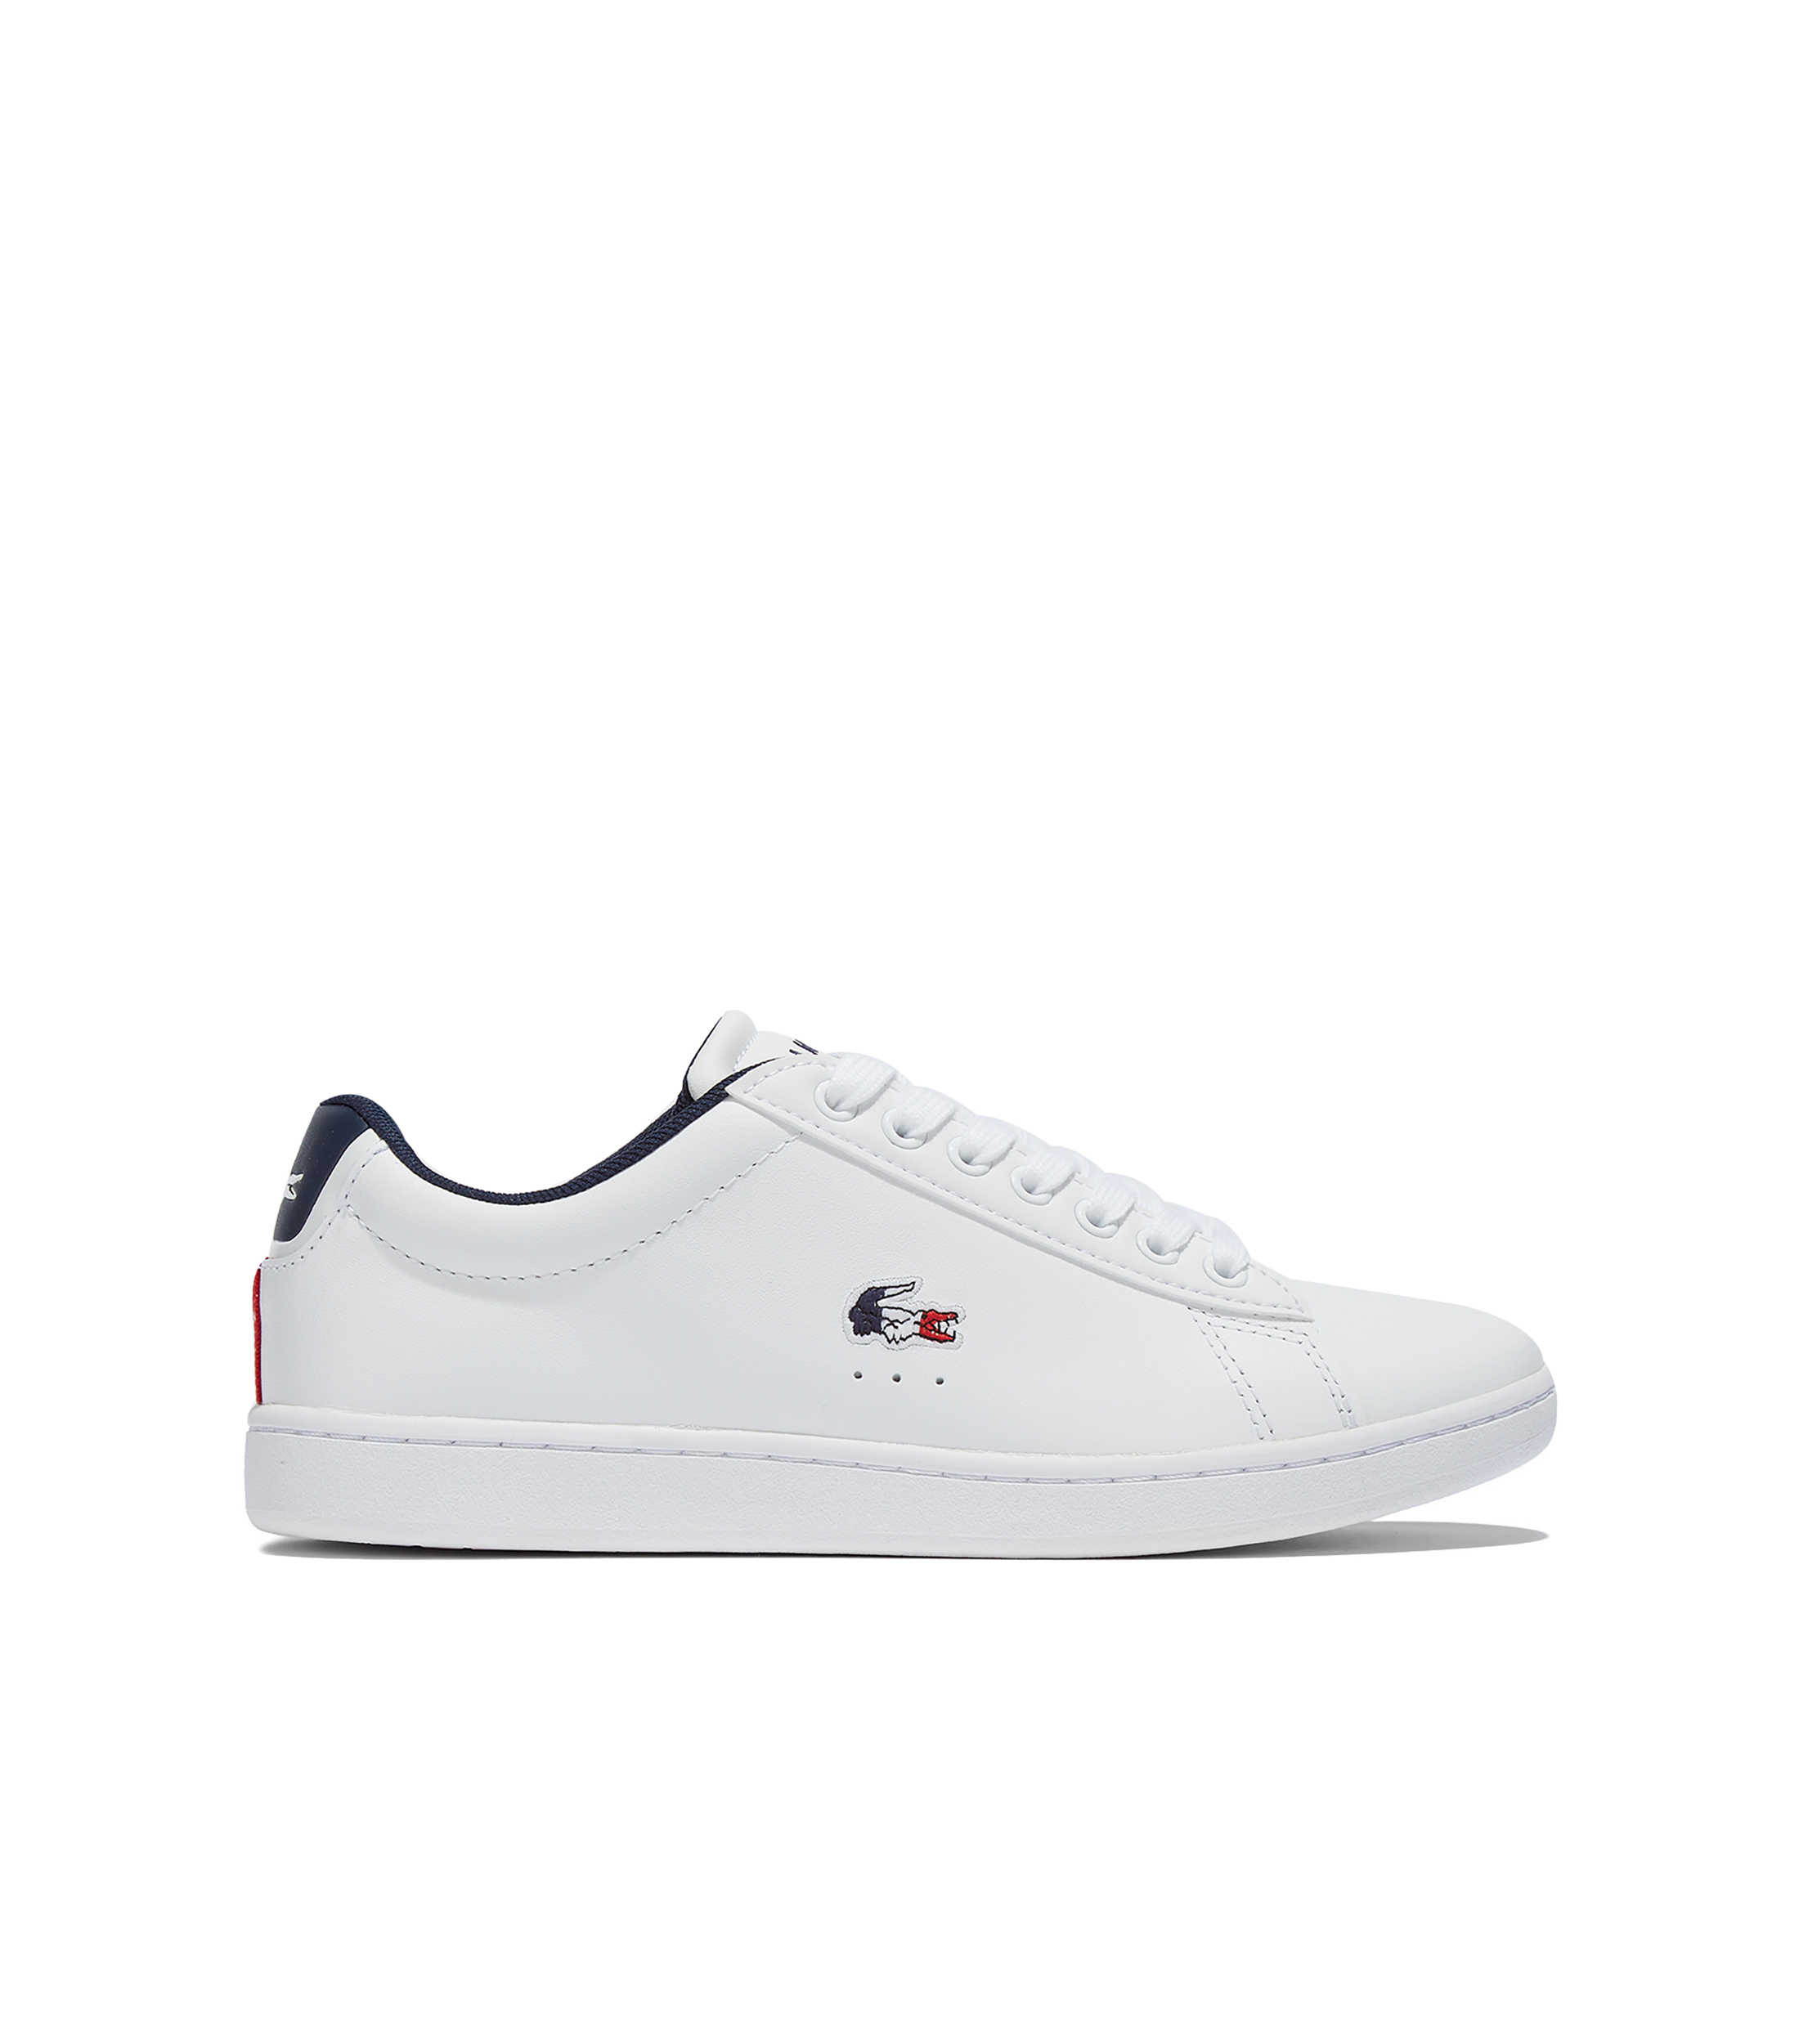  Tenis Lacoste Mujer